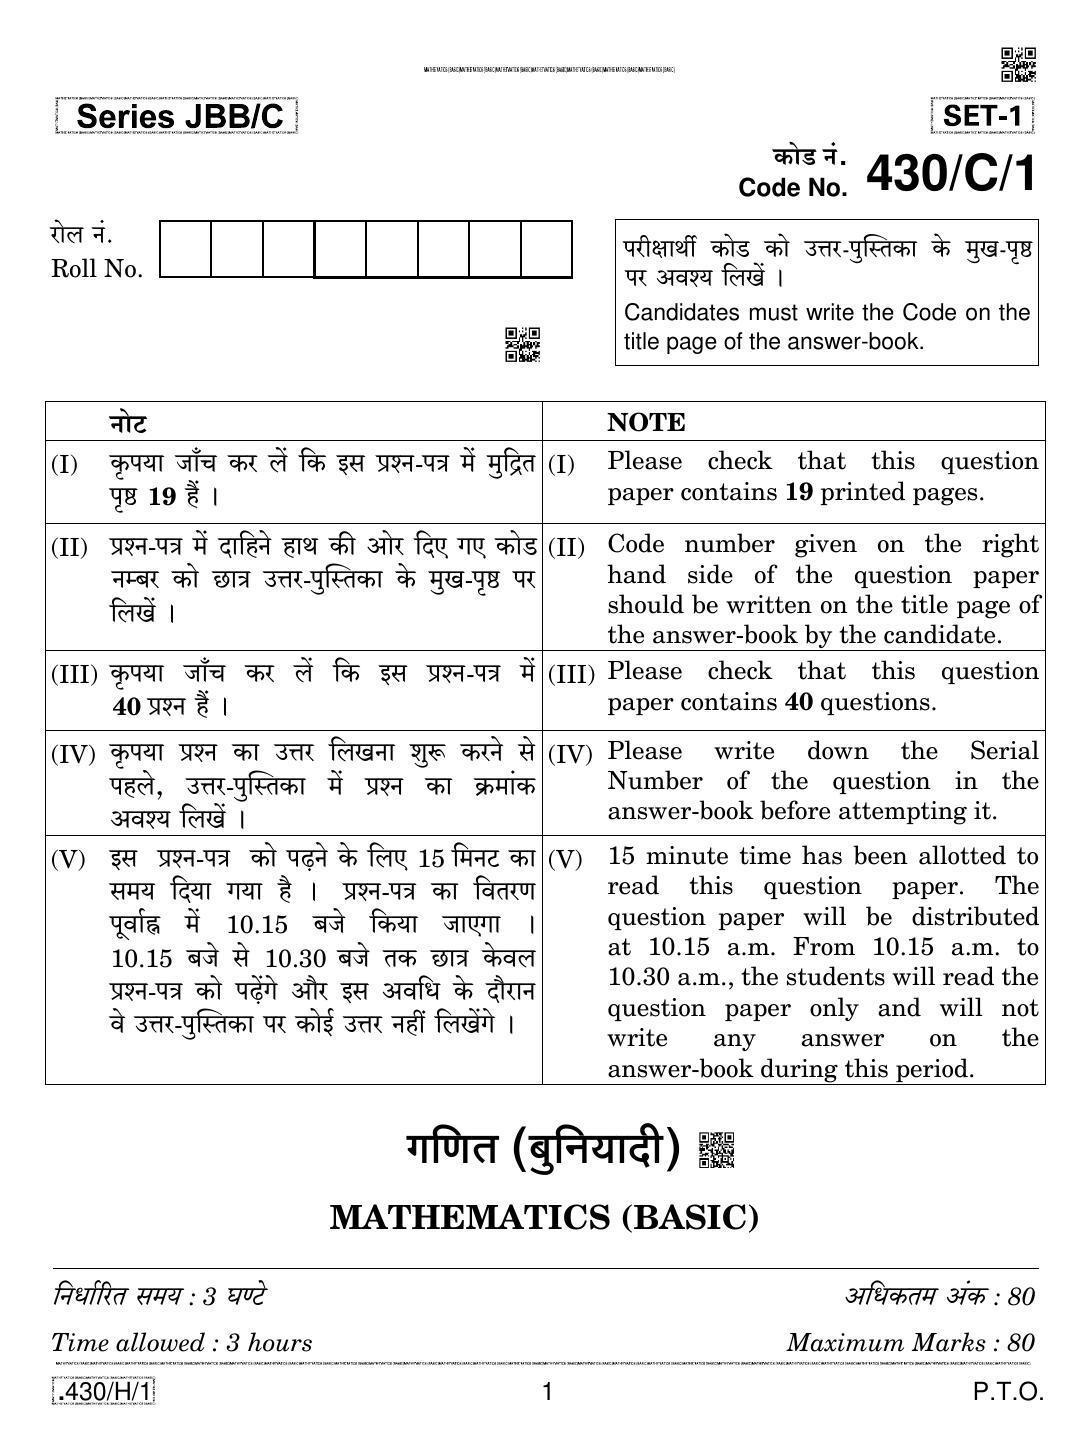 CBSE Class 10 430-C-1 - Maths (Basic) 2020 Compartment Question Paper - Page 1